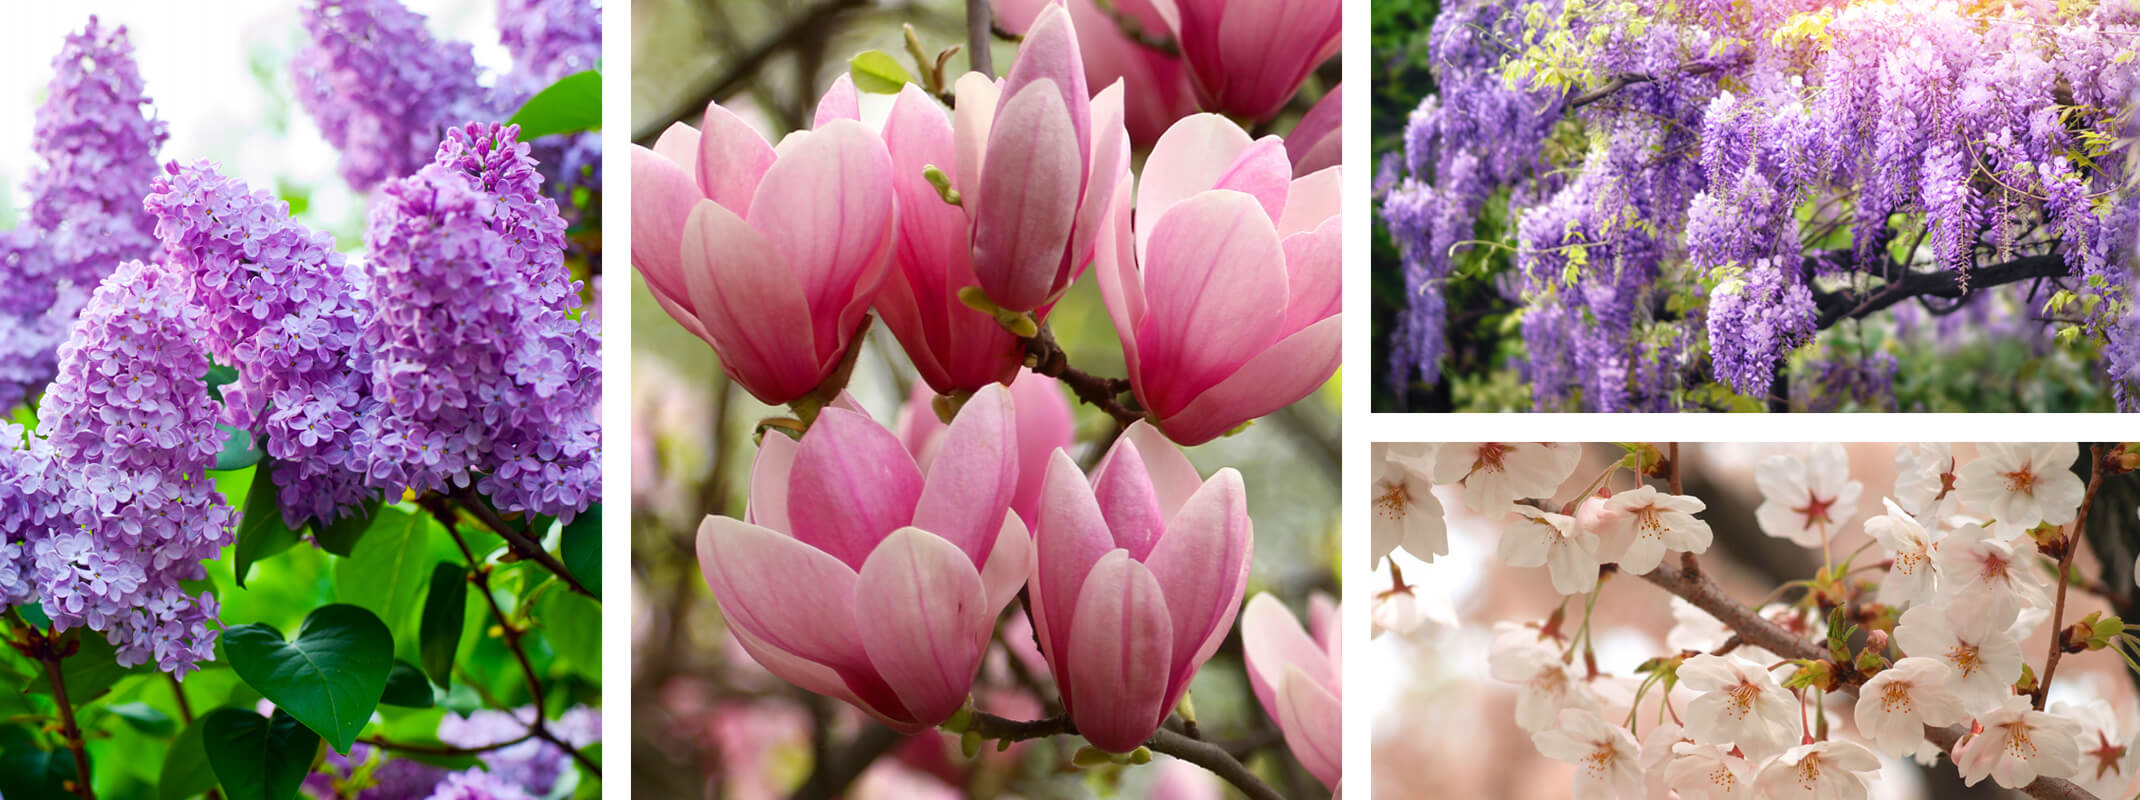 Flowering trees and shrubs collage with 4 images starting with lilac, magnolia, wisteria and flowering cherry tree